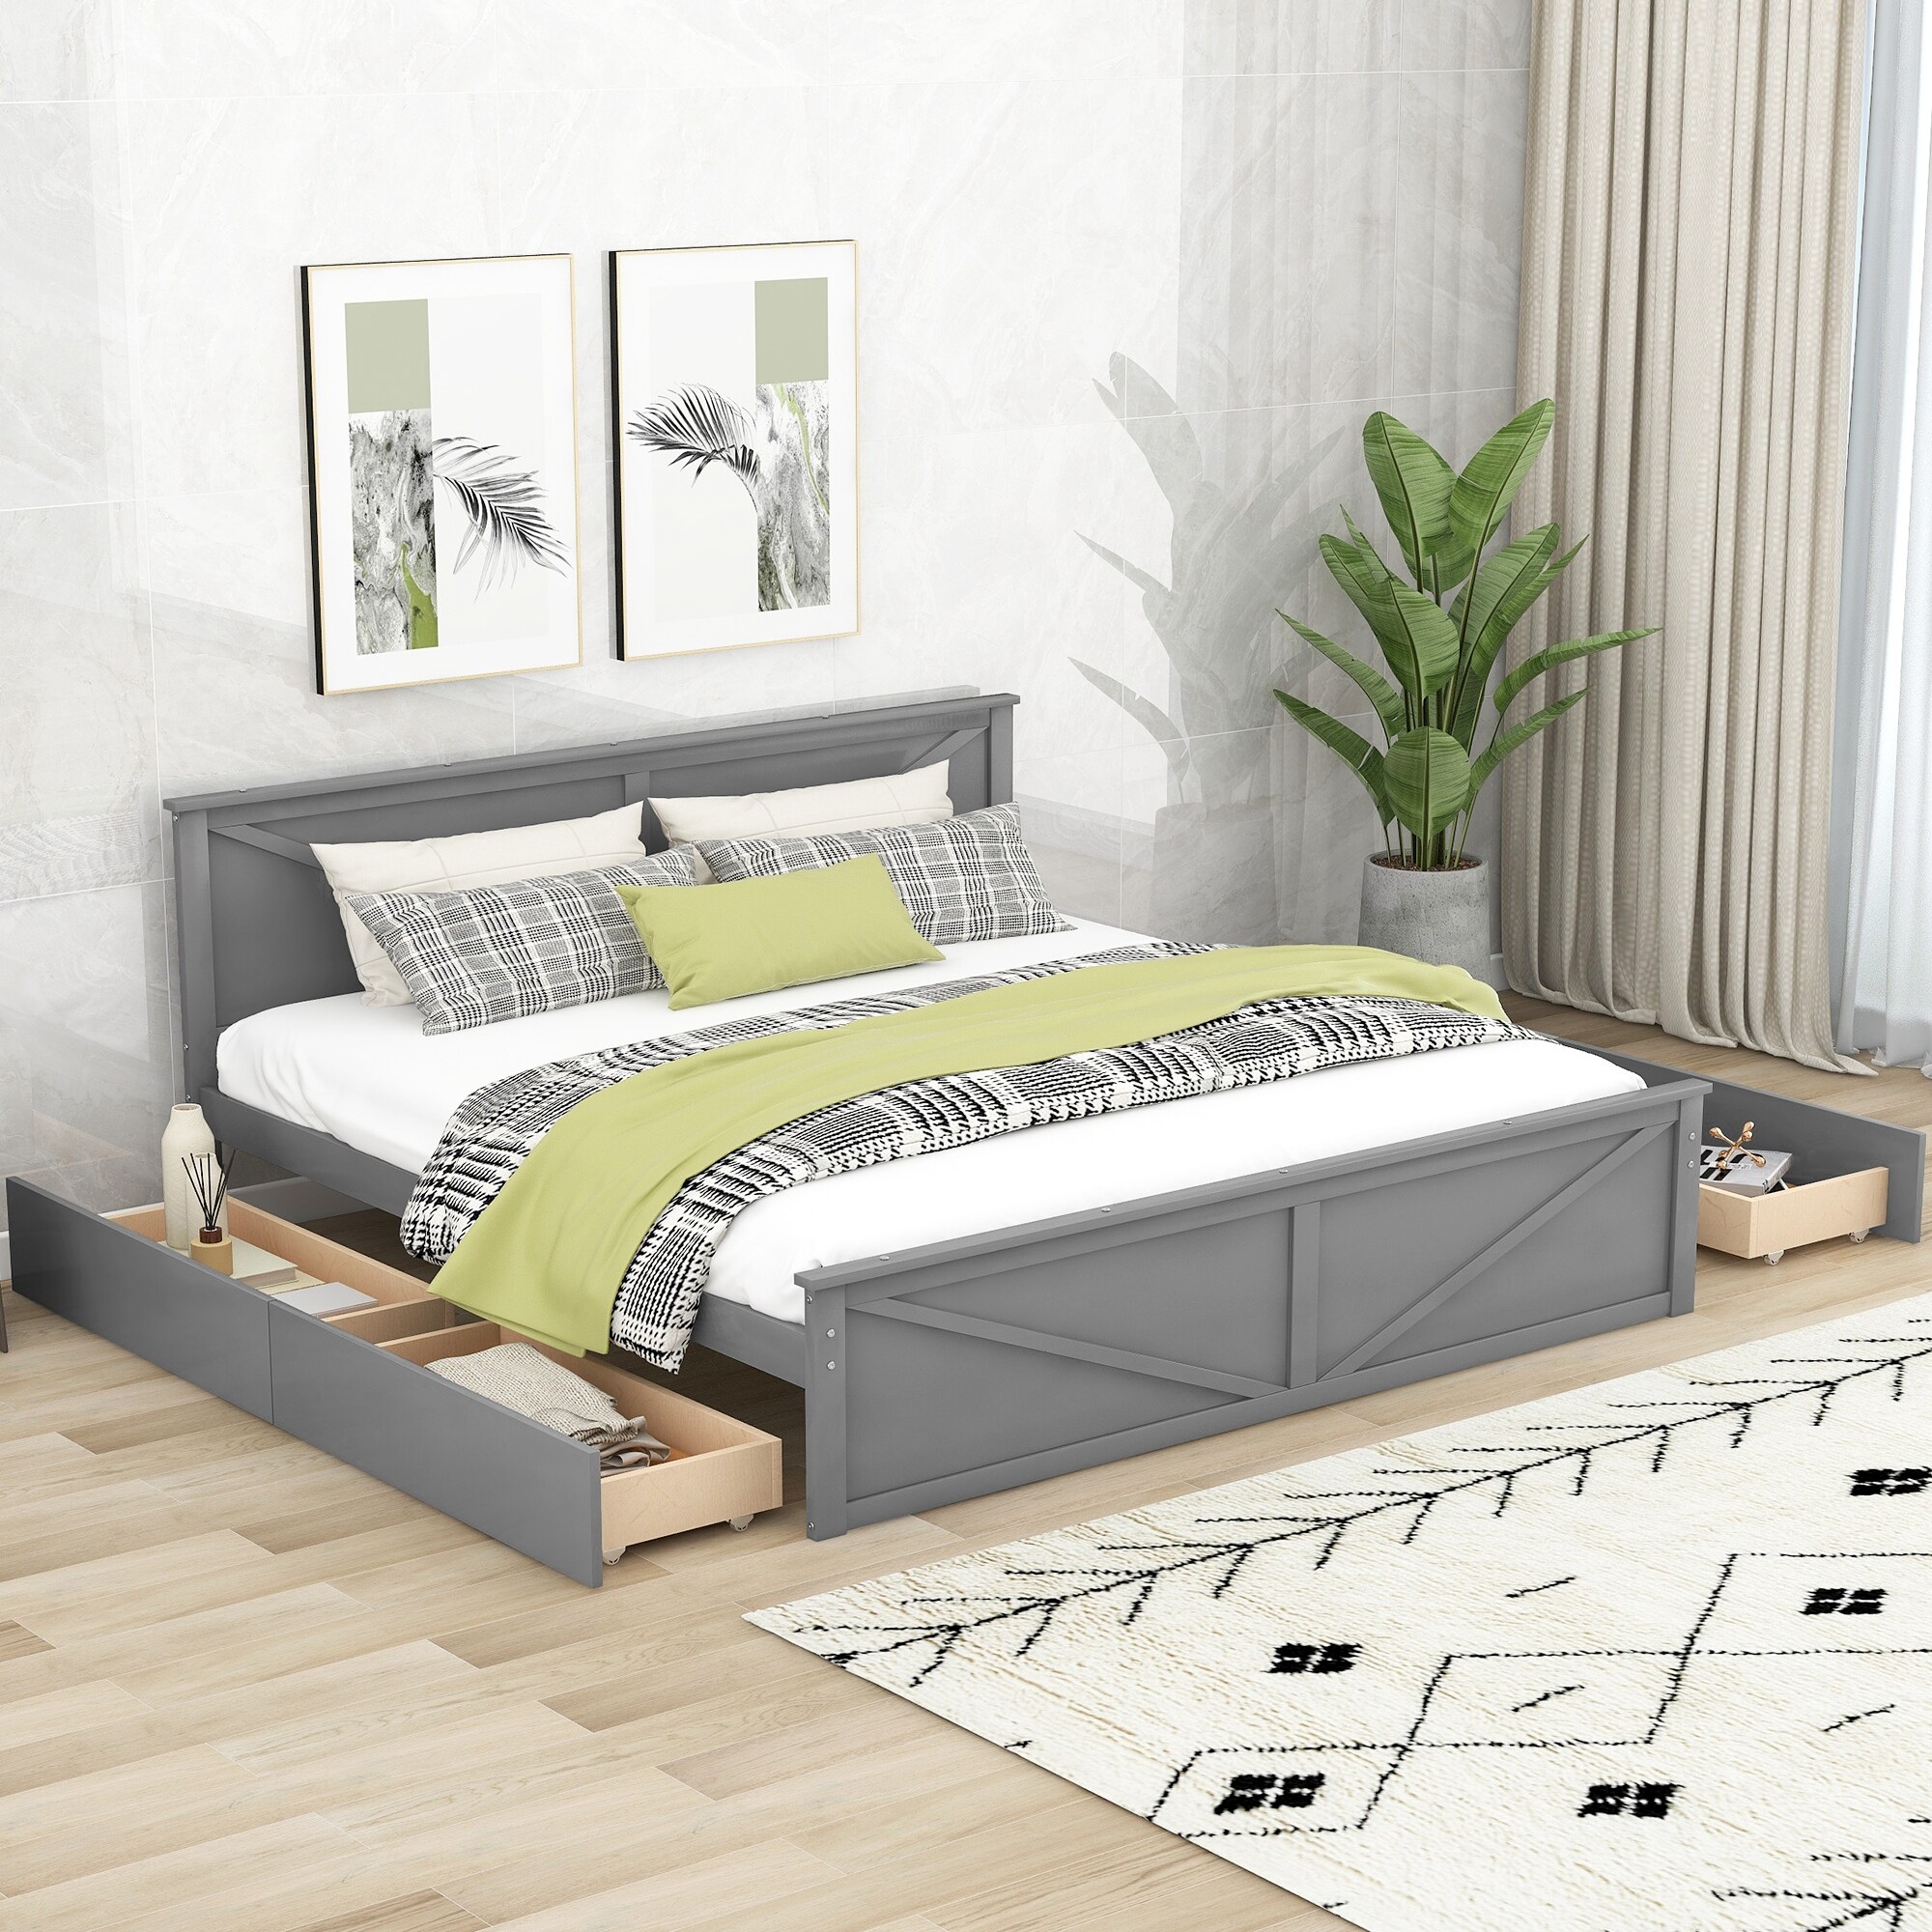 King Size Wooden Platform Bed Modern Sturdy Wooden Headboard with Four Removable Storage Drawers and Slatted Frame Support